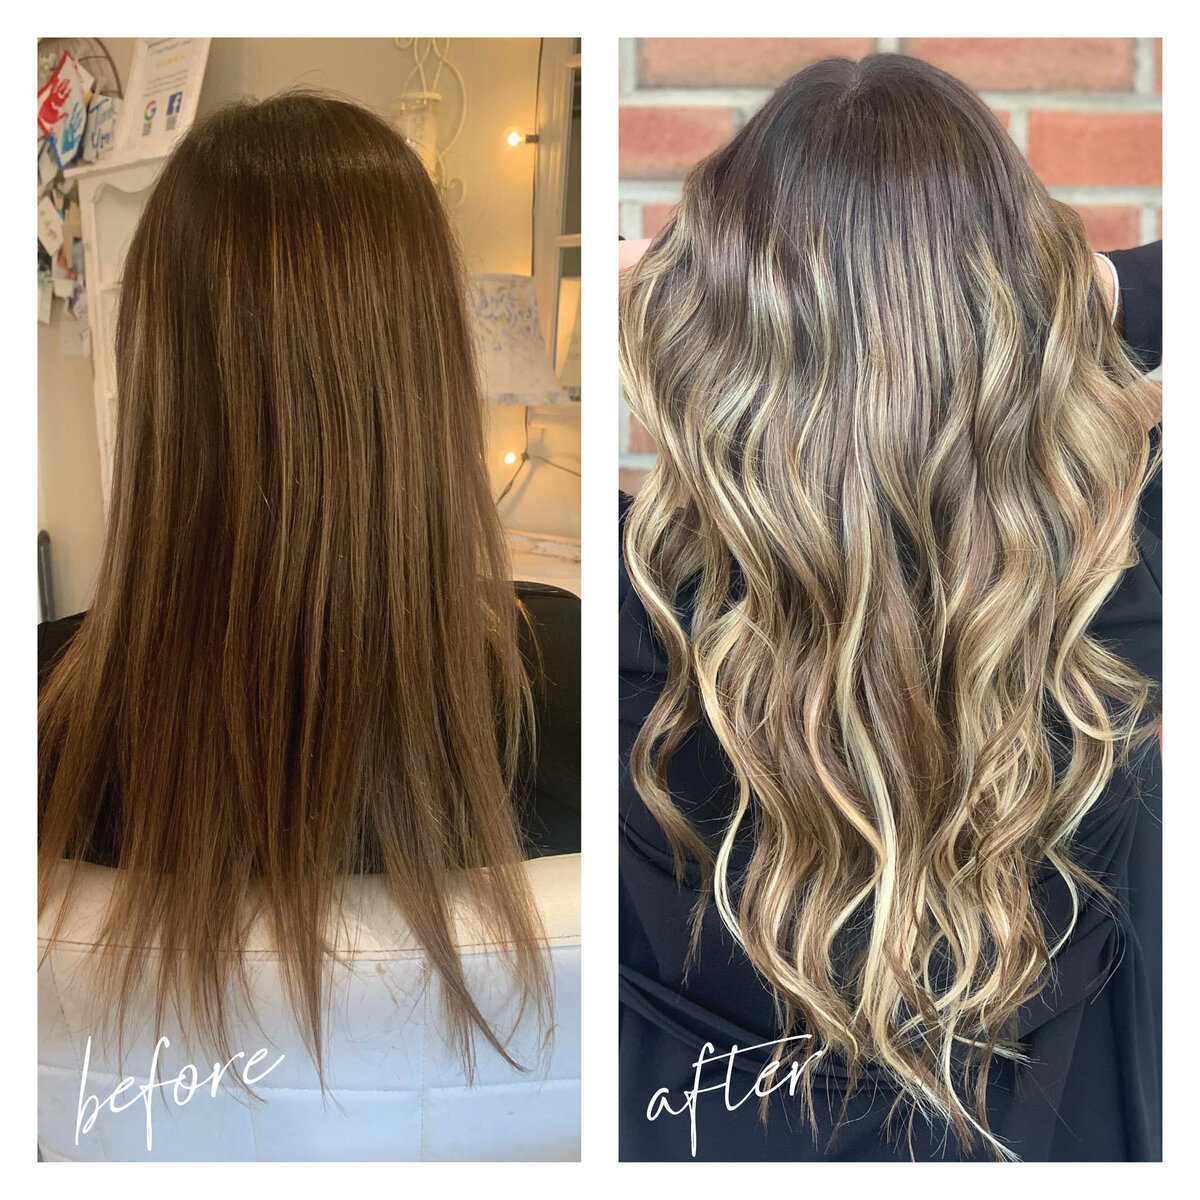 640x640 before & after hair extensions3